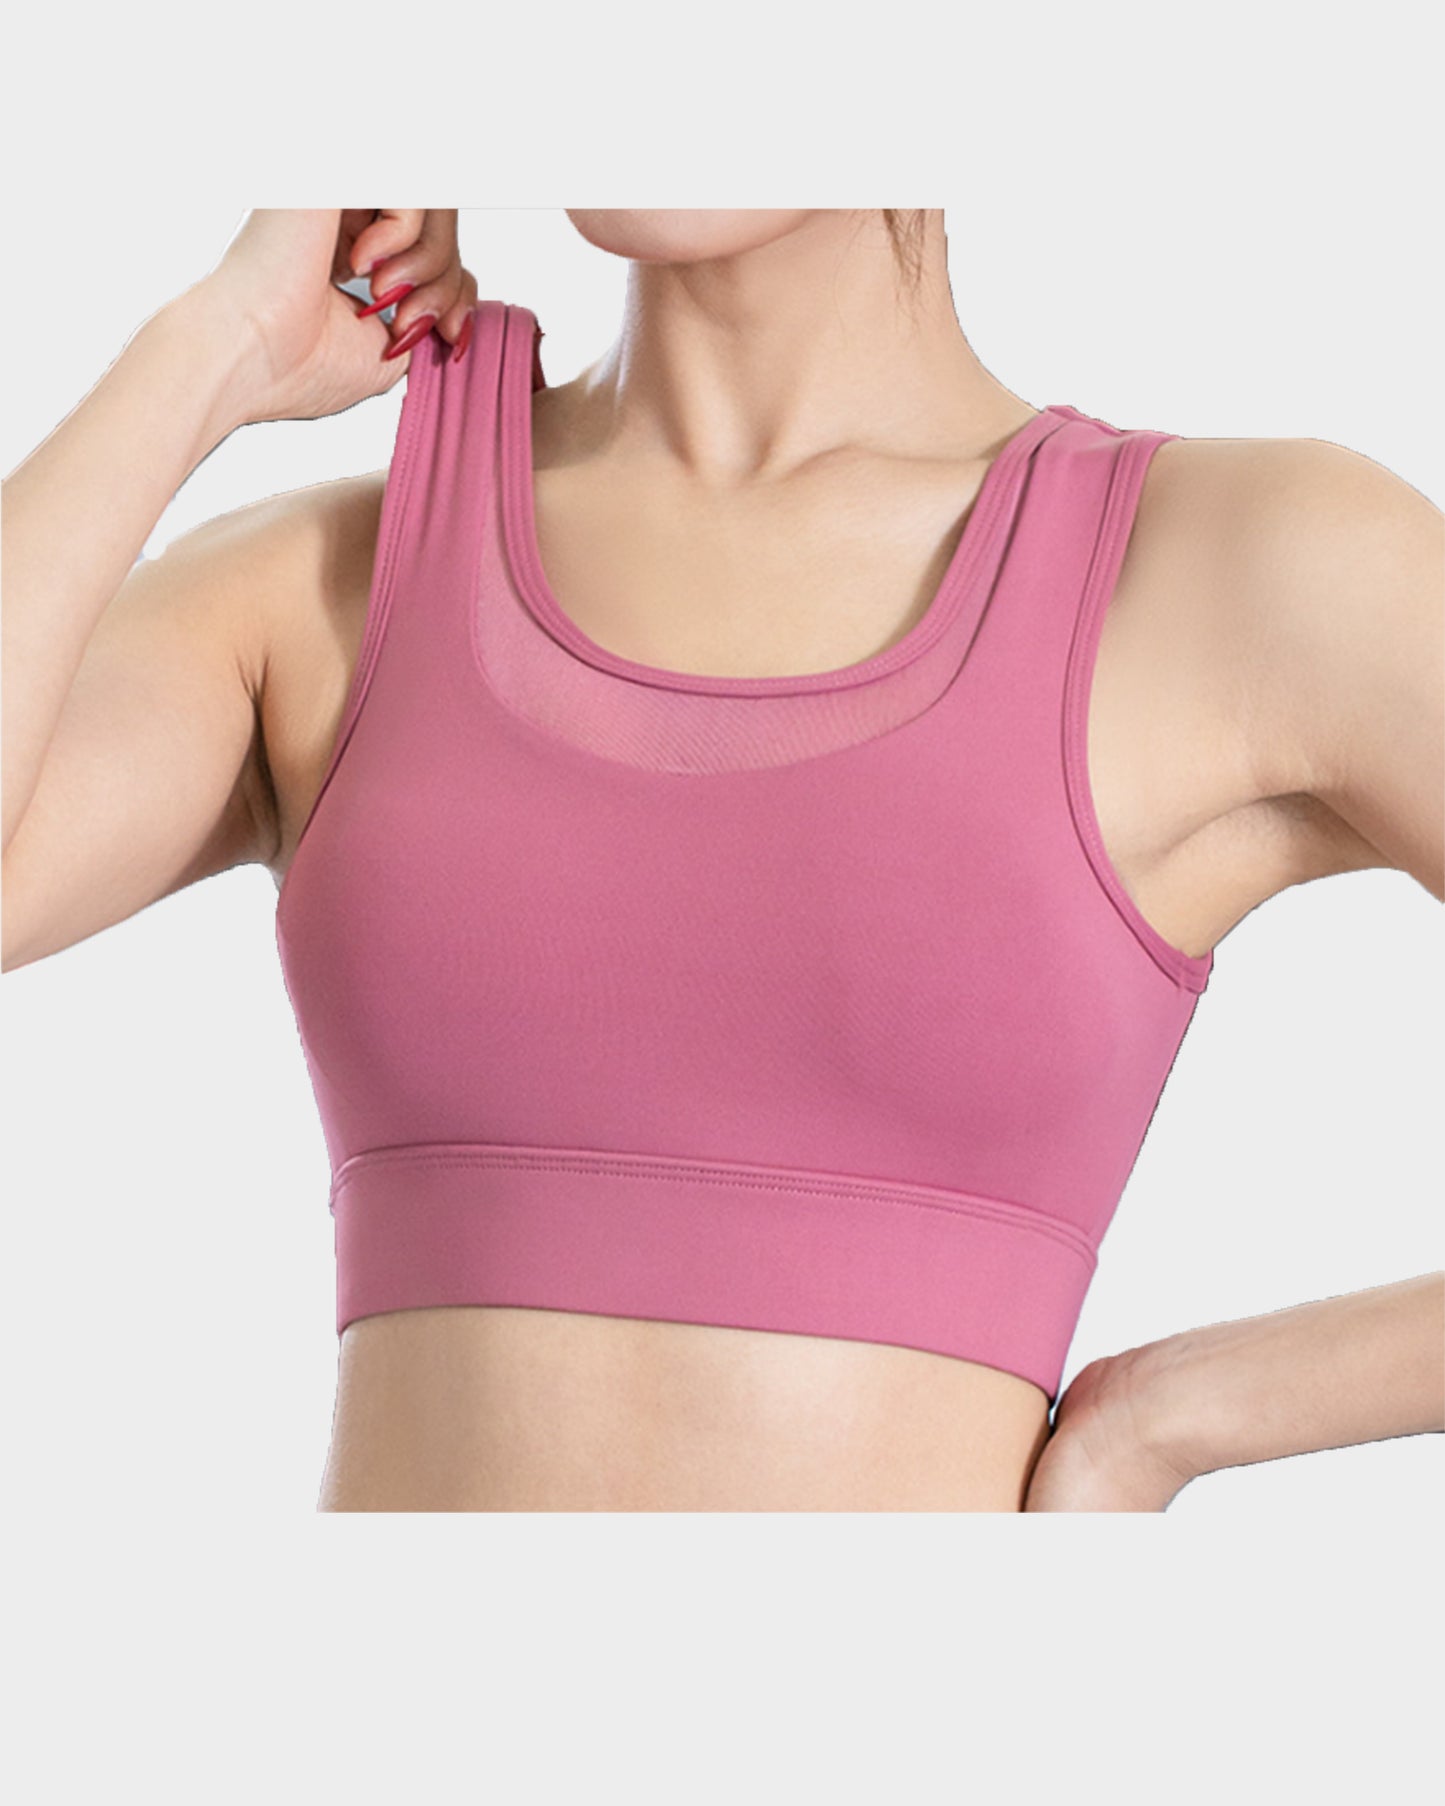 Shop Sports Bras at Hourglass Lingerie